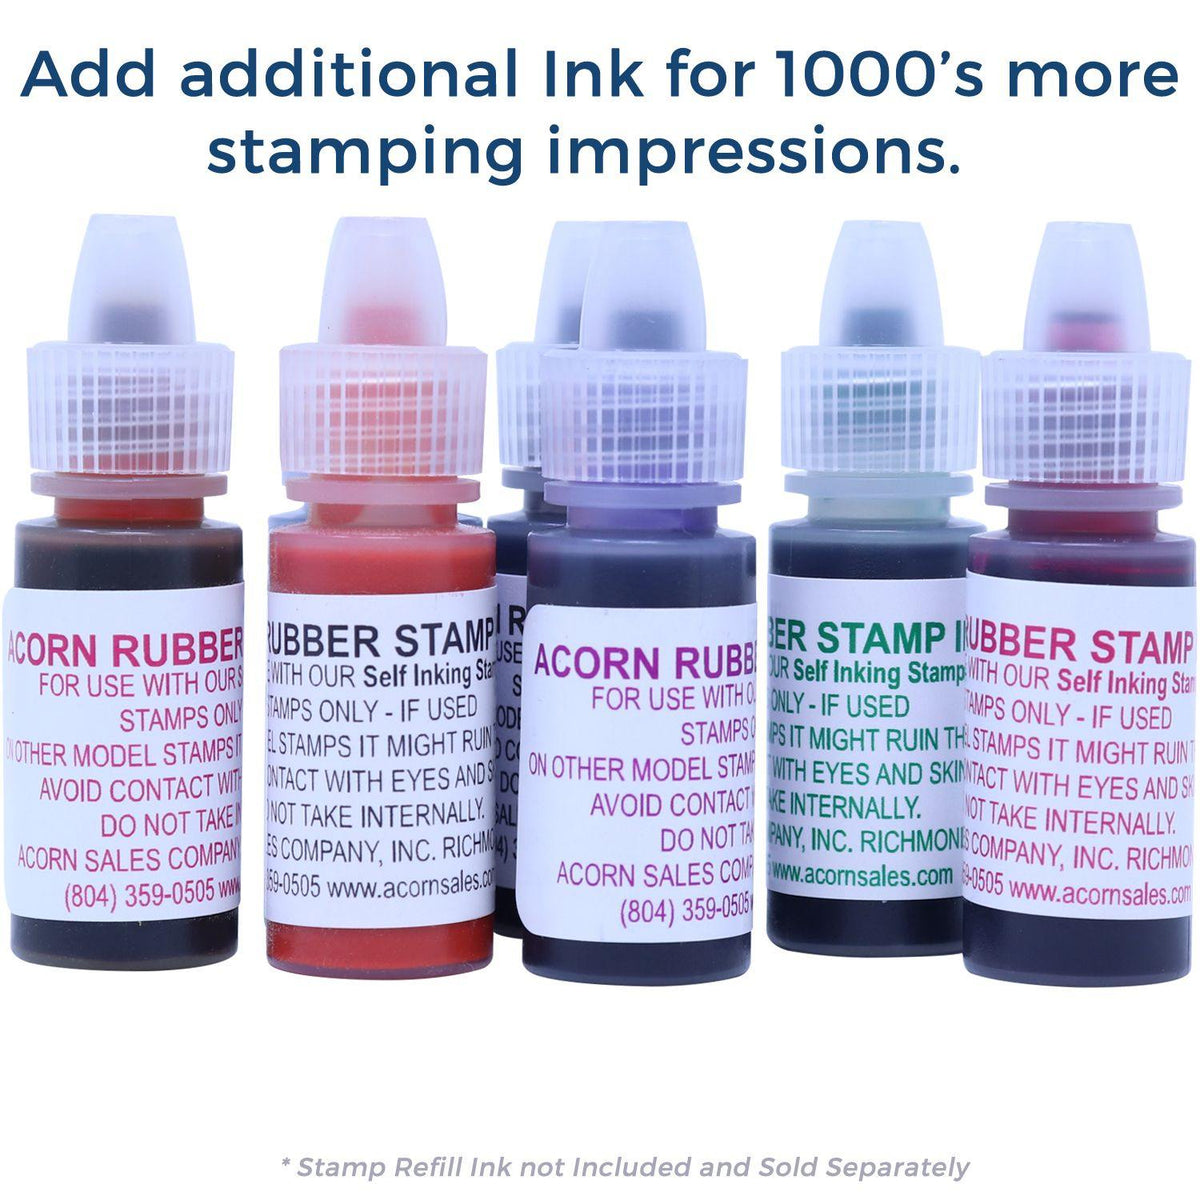 Refill Inks for Large Pre-Inked Received Without Contents Stamp Available